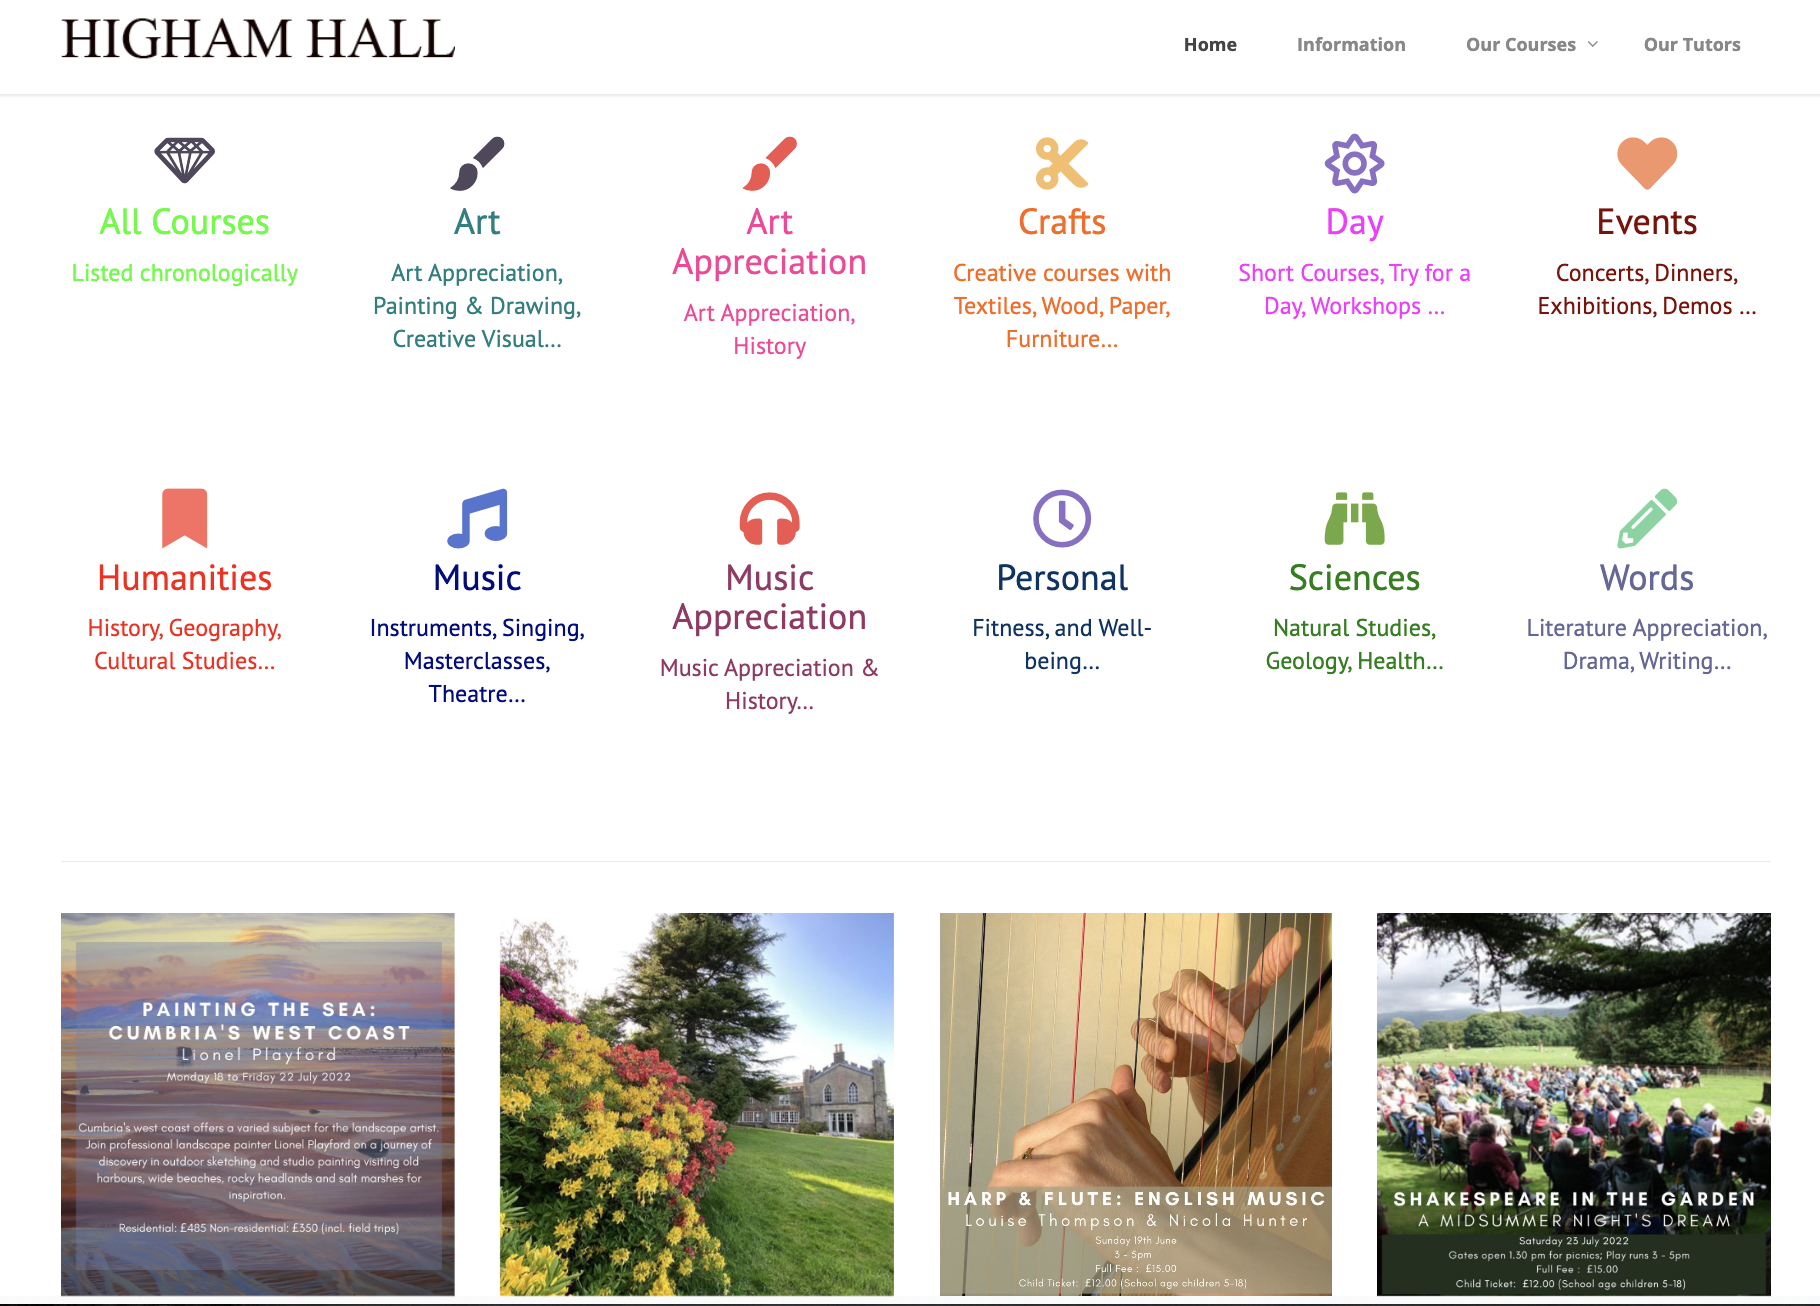 courses at Higham Hall